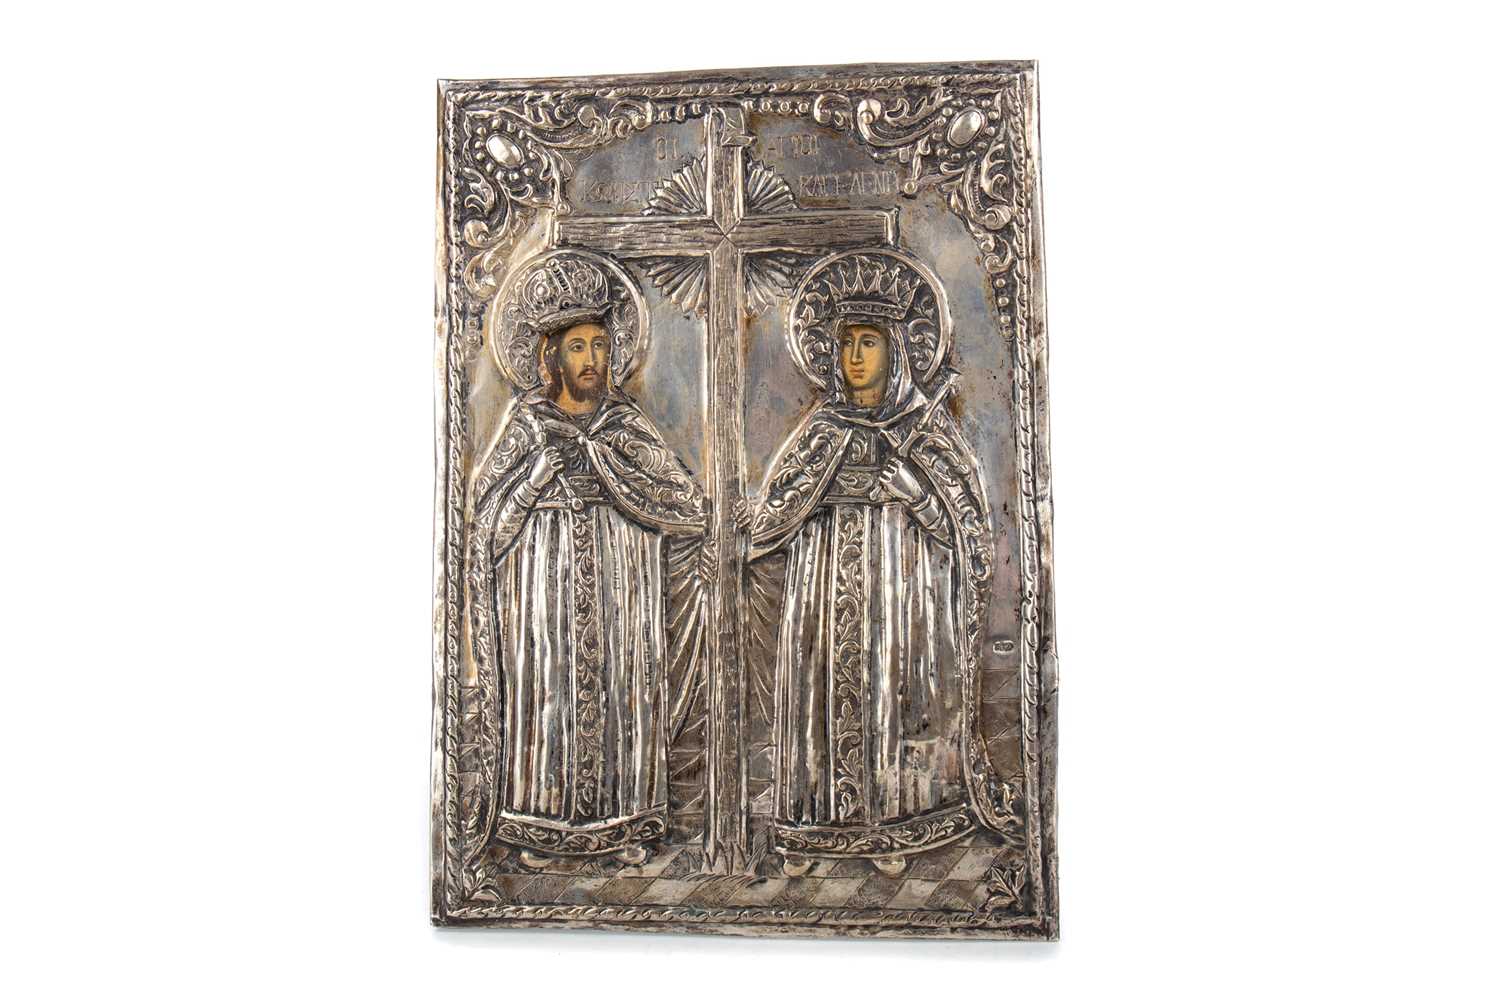 Lot 744 - A GREEK ORTHODOX SILVER MOUNTED ICON